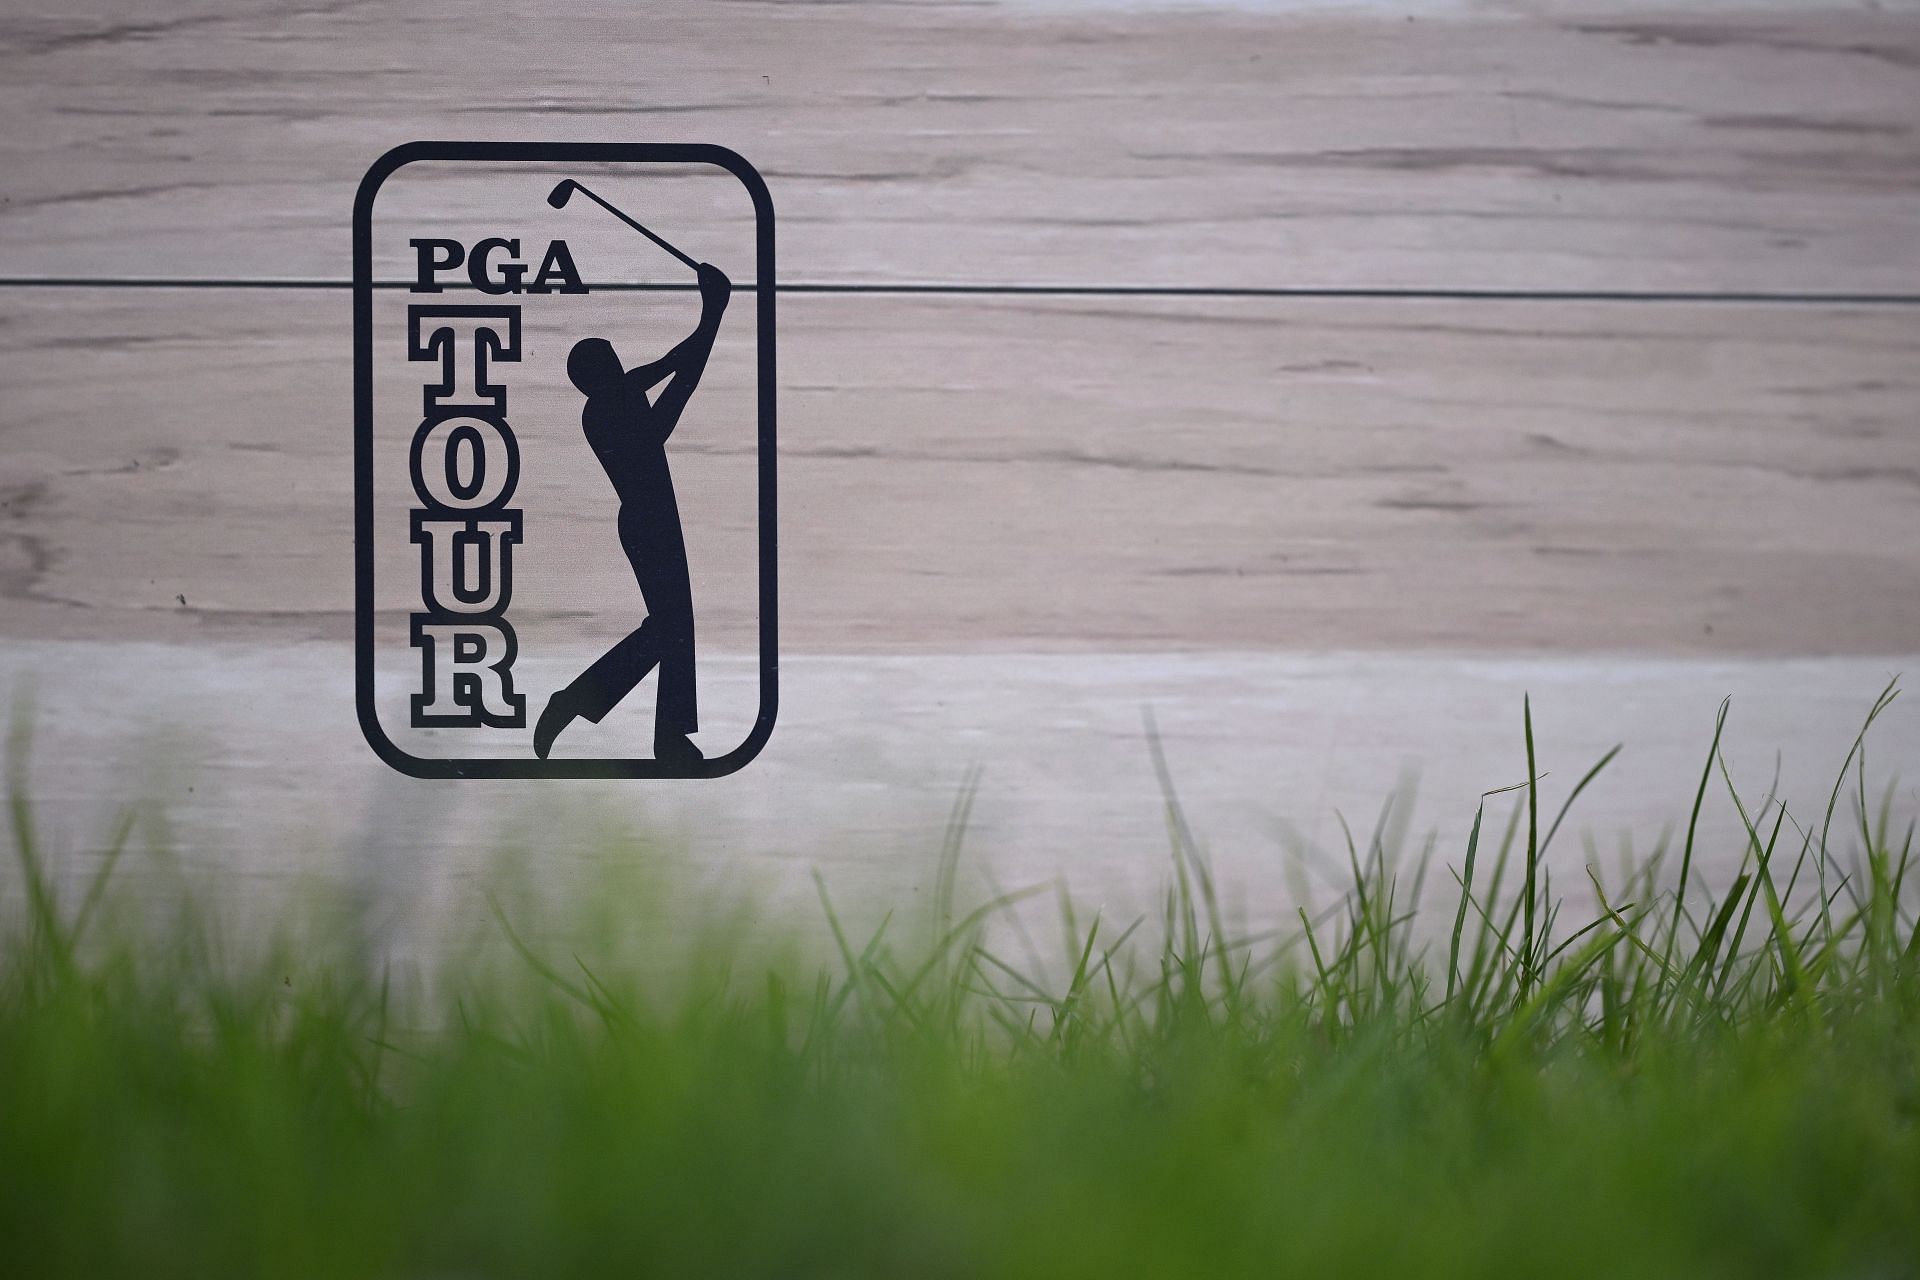 The Pebble Beach Pro-Am is experiencing bad weather